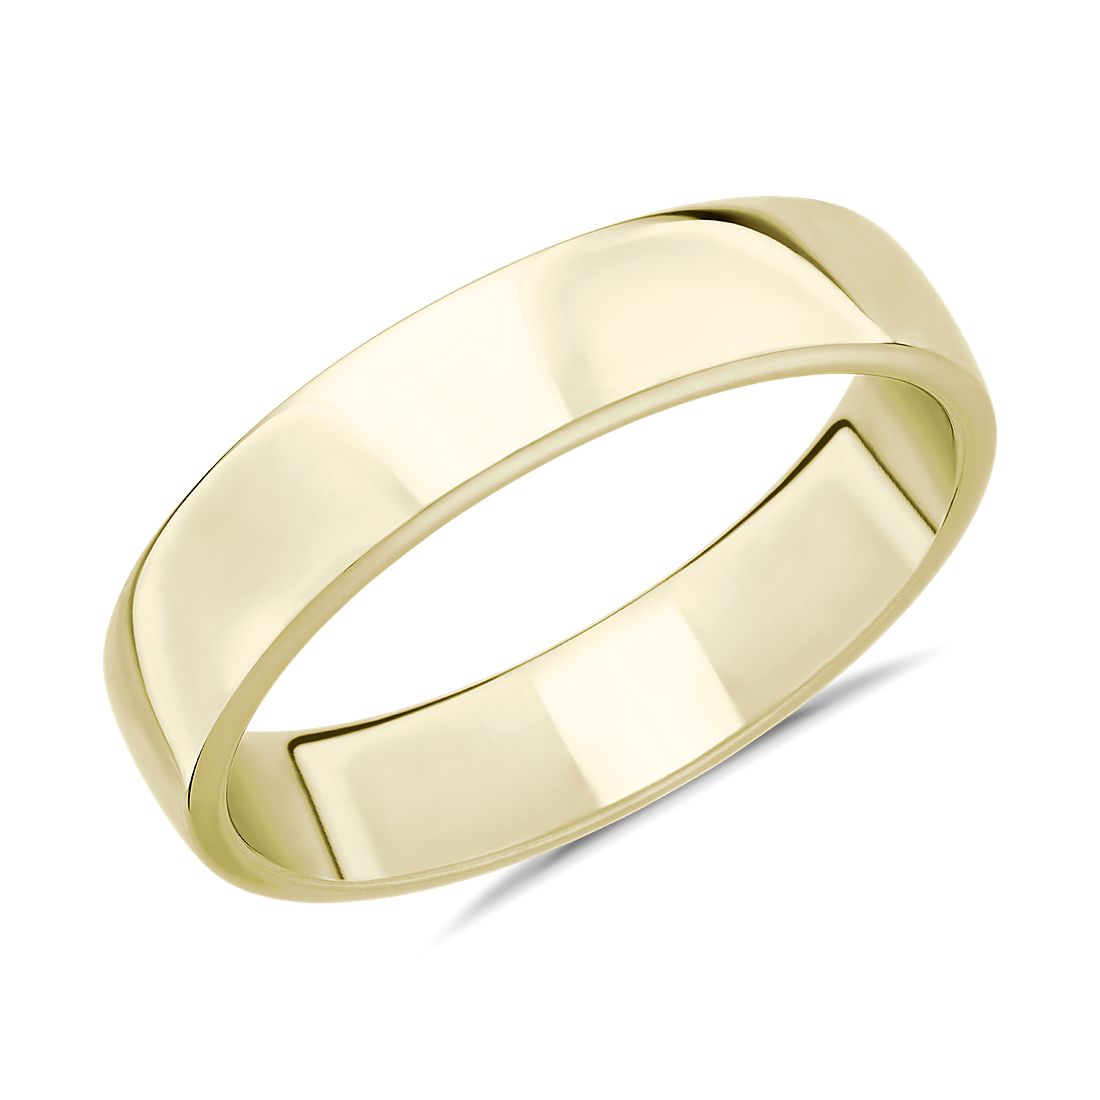 Skyline Comfort Fit Wedding Ring in 14k Yellow Gold (5 mm)